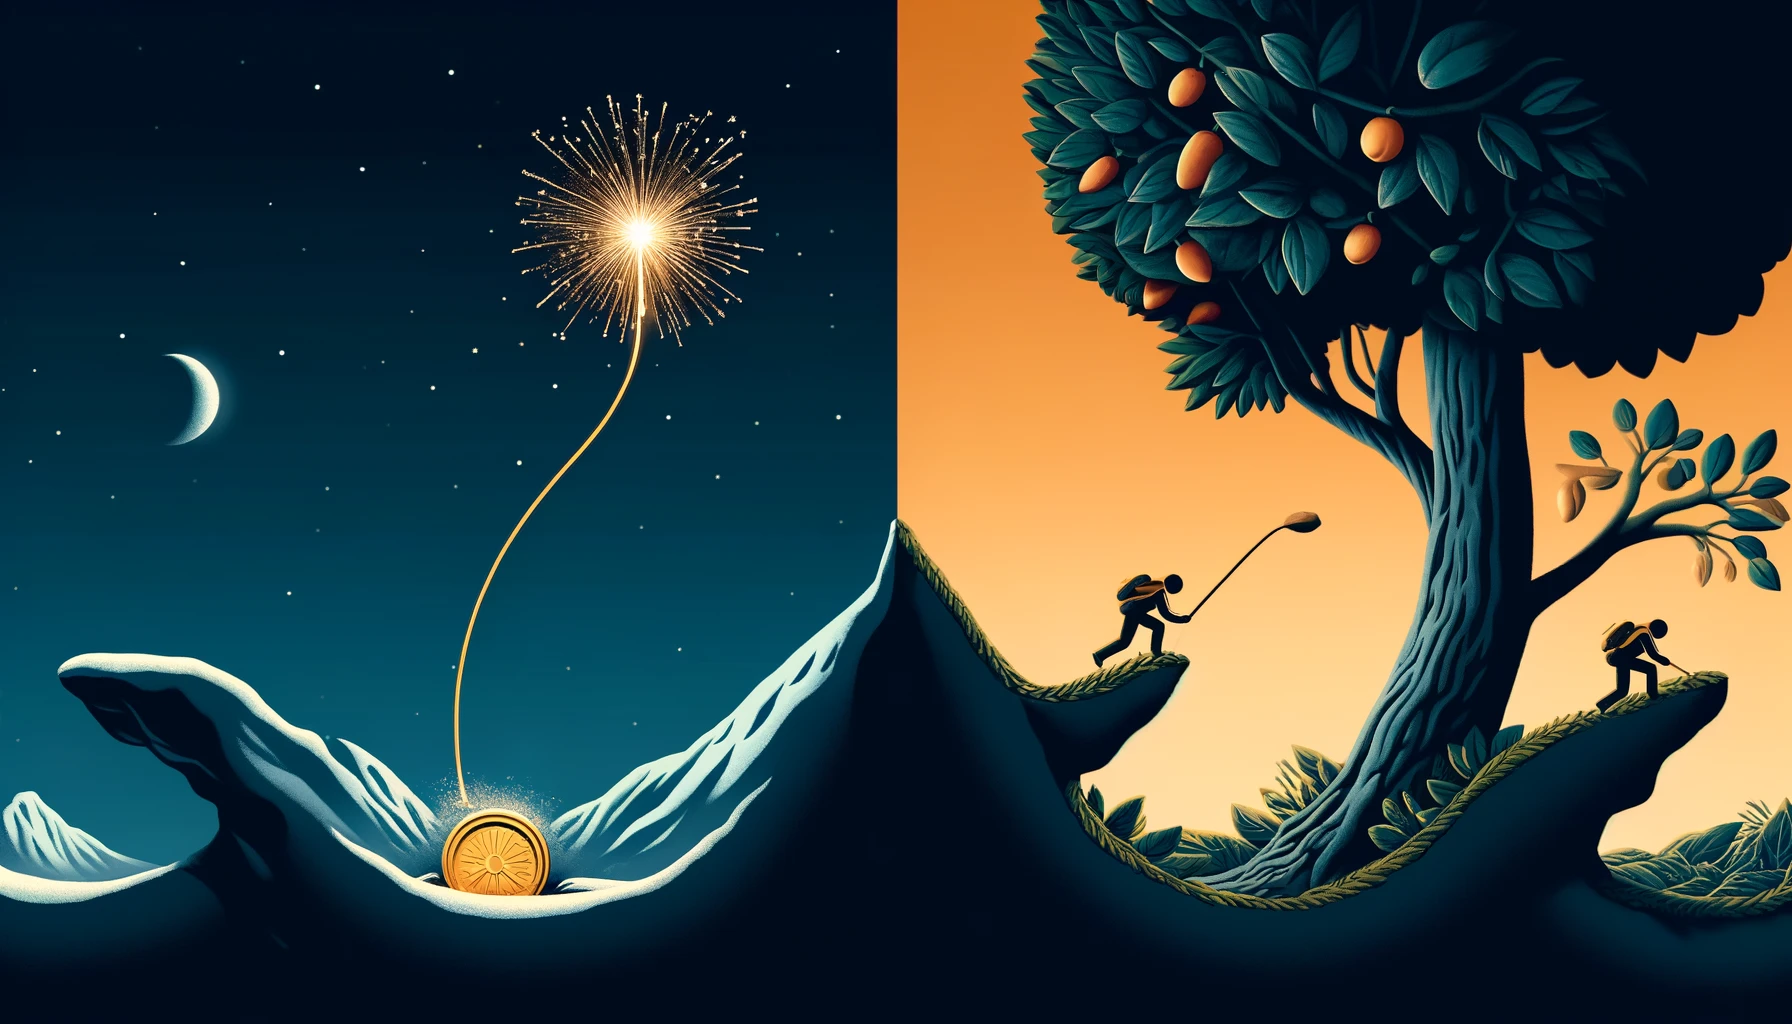 Visual contrast between instant gratification, depicted as a burst of fireworks, and long-term rewards, symbolized by a fruit-bearing tree and a mountain climber reaching a summit, illustrating the balance between short-term pleasure and lasting achievements.